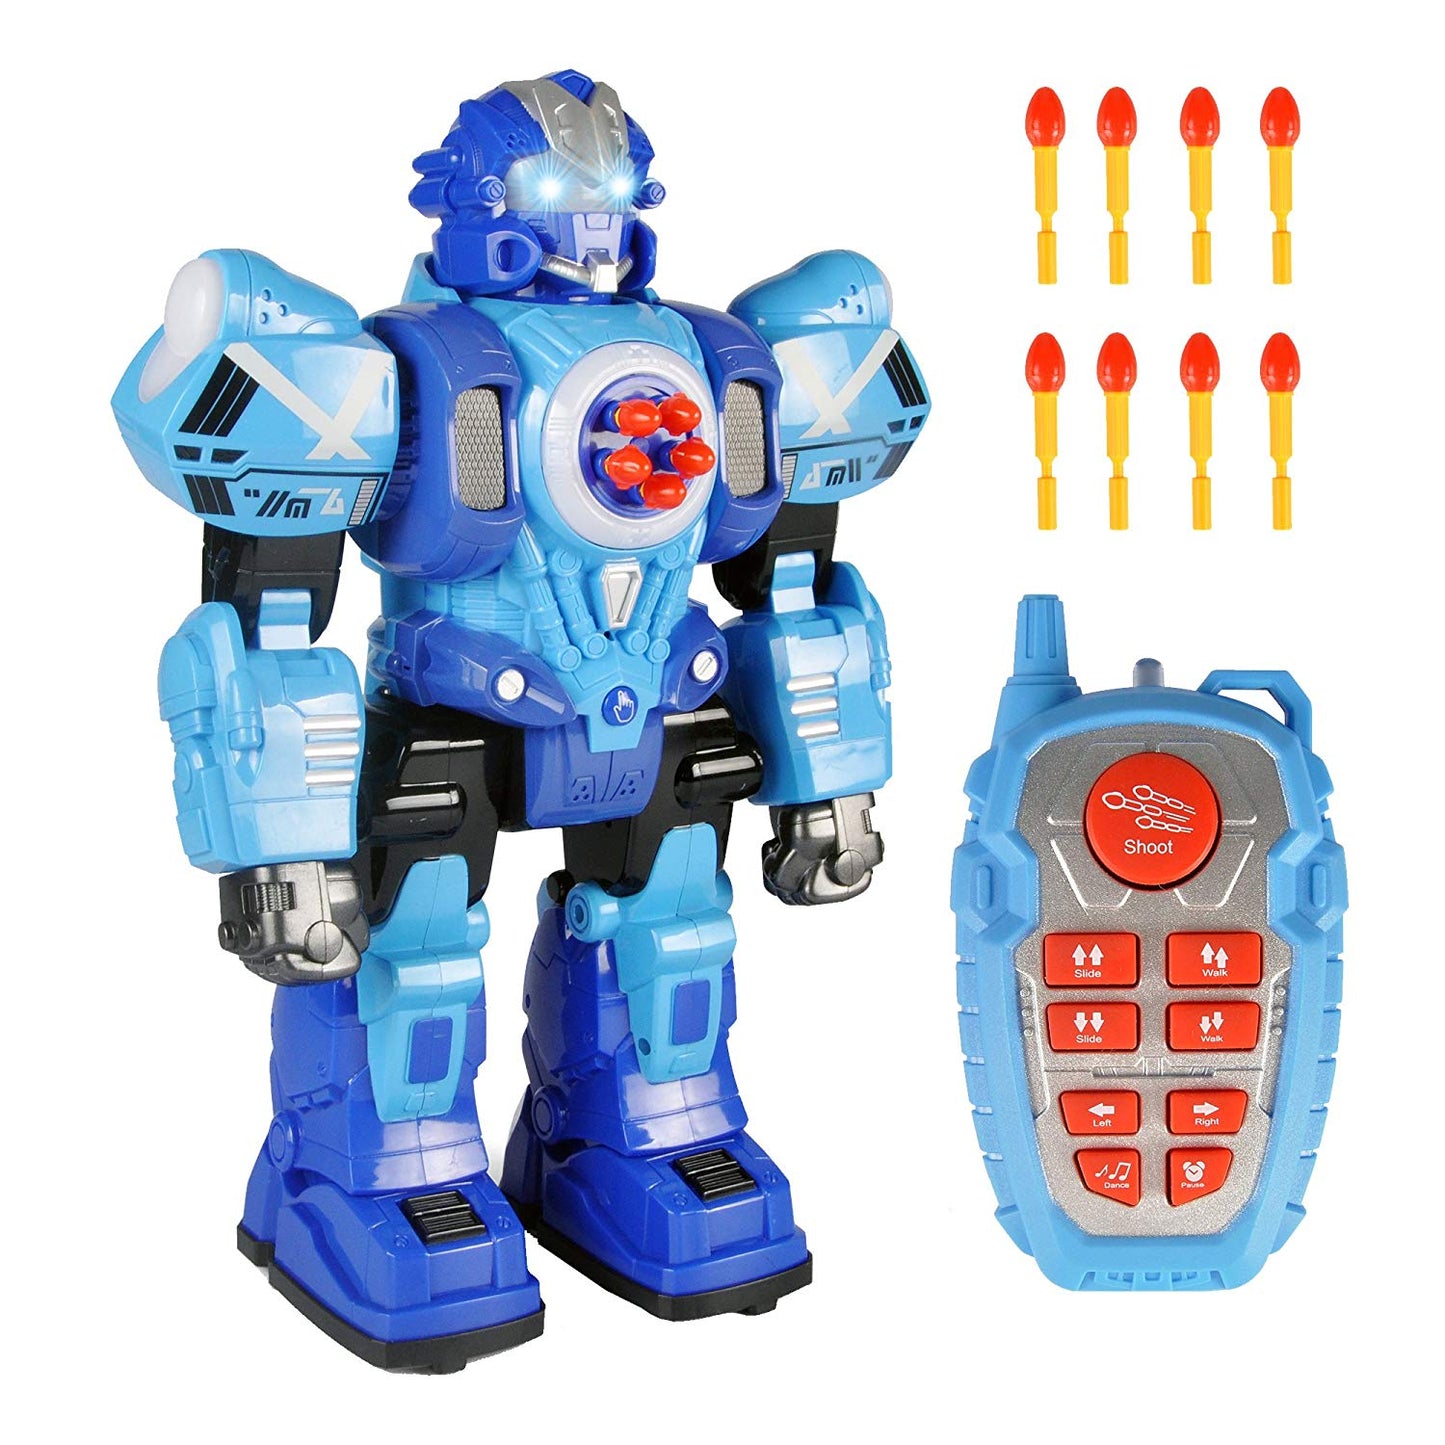 Large Remote Control Robot Toy for Kids - RC Robot Shoots Darts, Walks, Talks, and Dances (10 Functions)